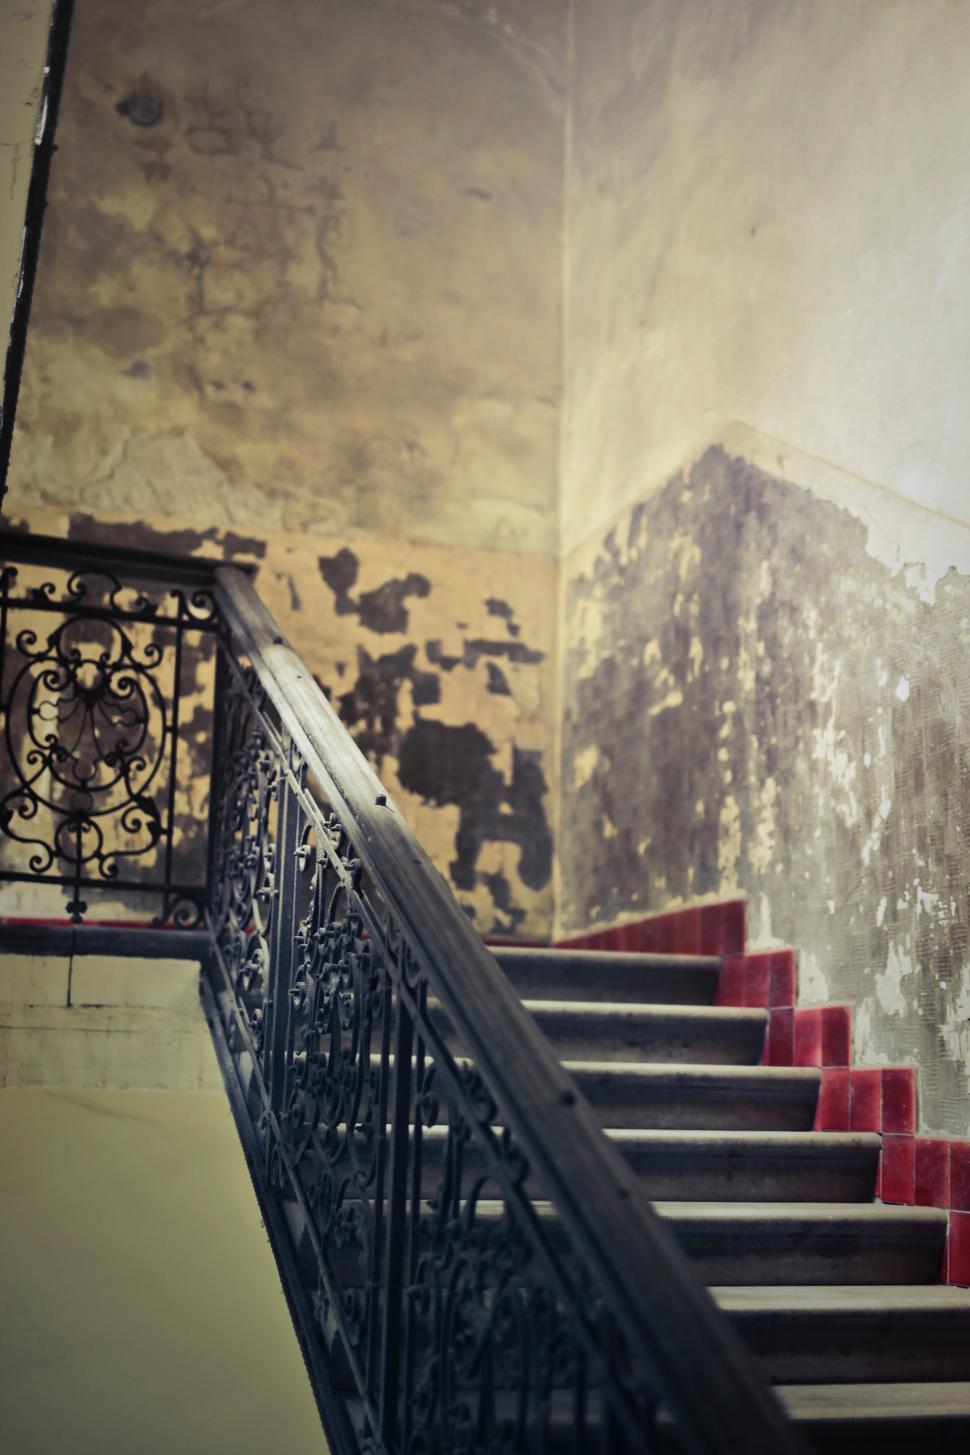 Free Image of Old staircase with metal railings 